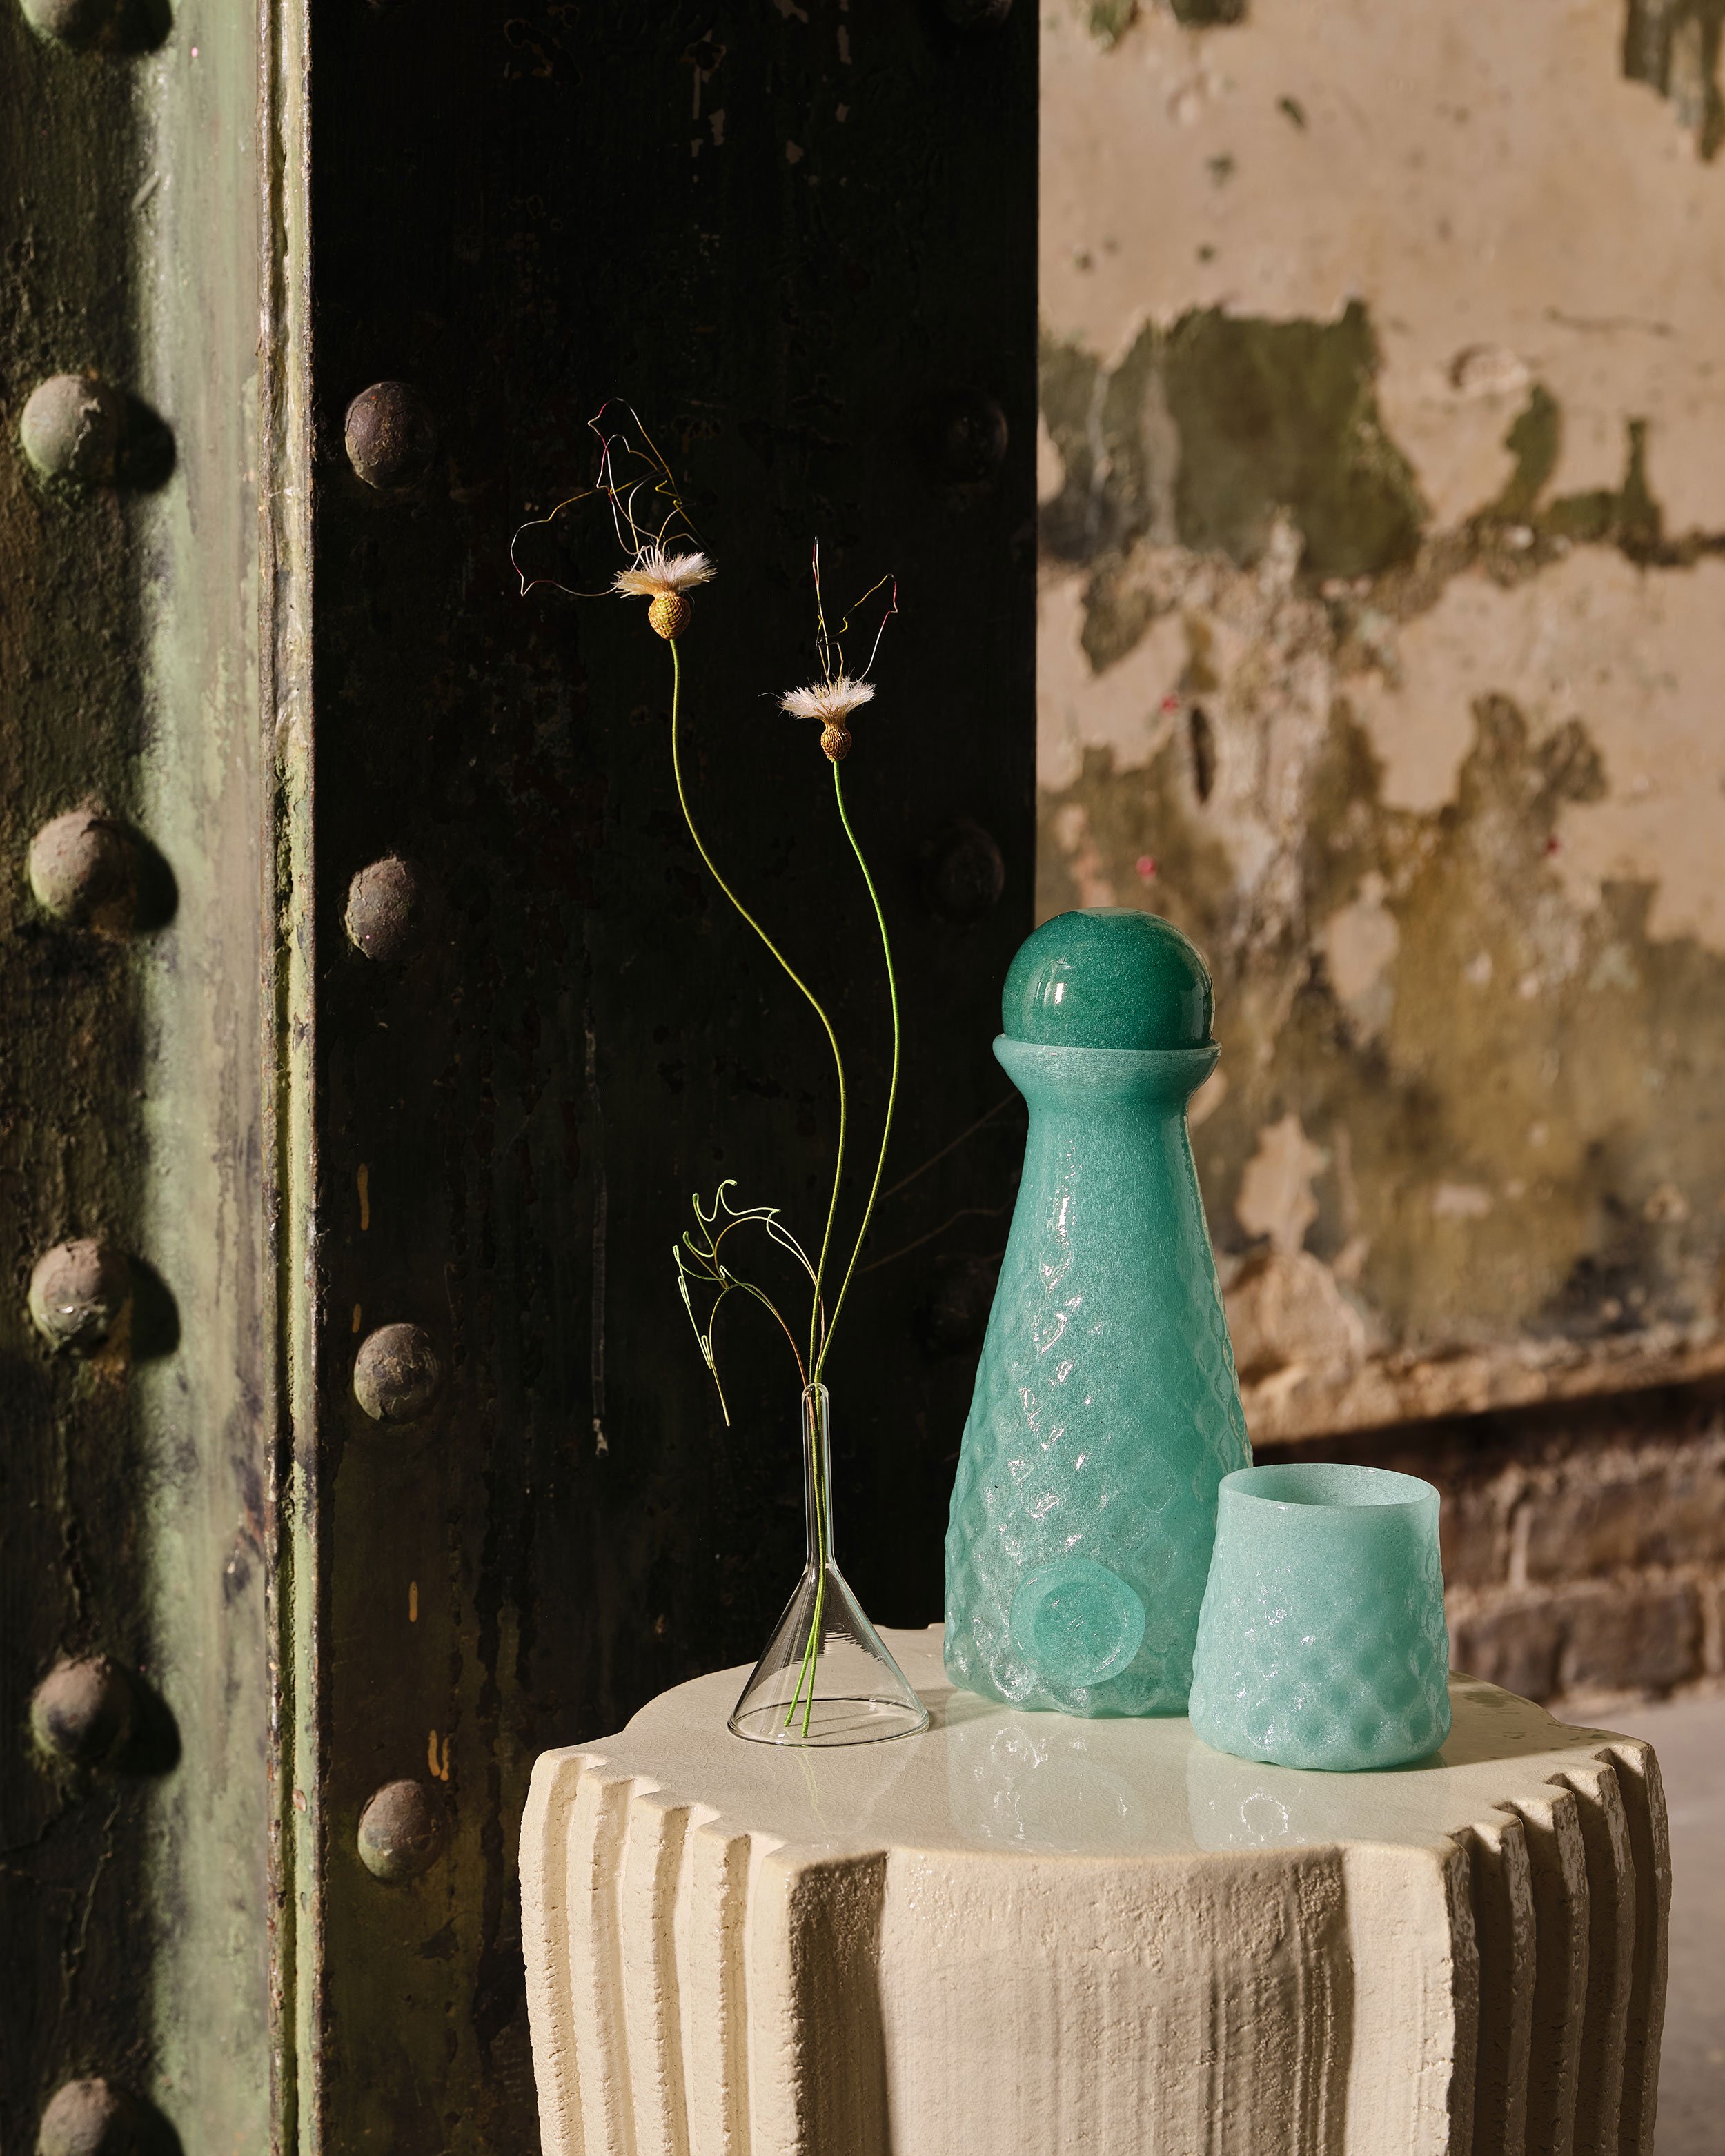 Flora by Bridget Bailey and Carafe by Lulu Harrison